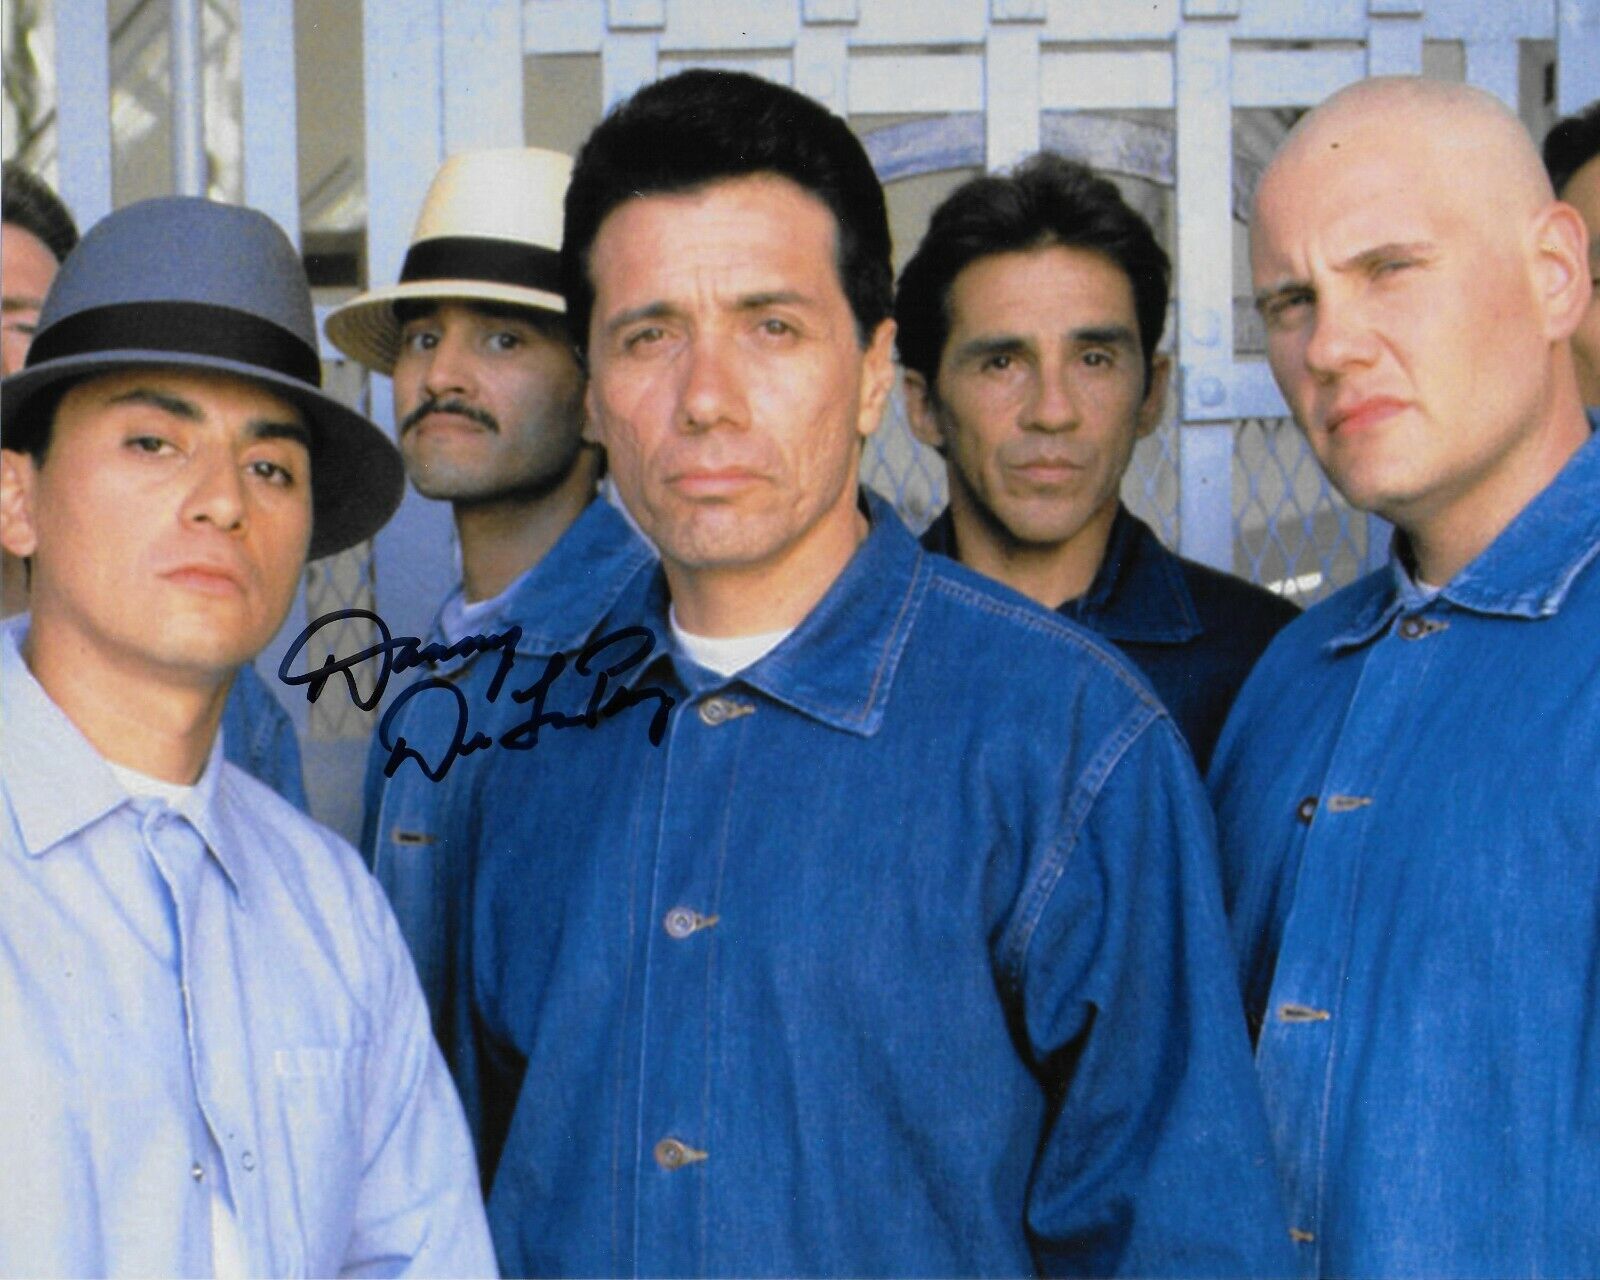 Danny De La Paz American Me 8X10 Signed 8x10 Photo Poster painting At Hollywoodshow RARE!!! #2